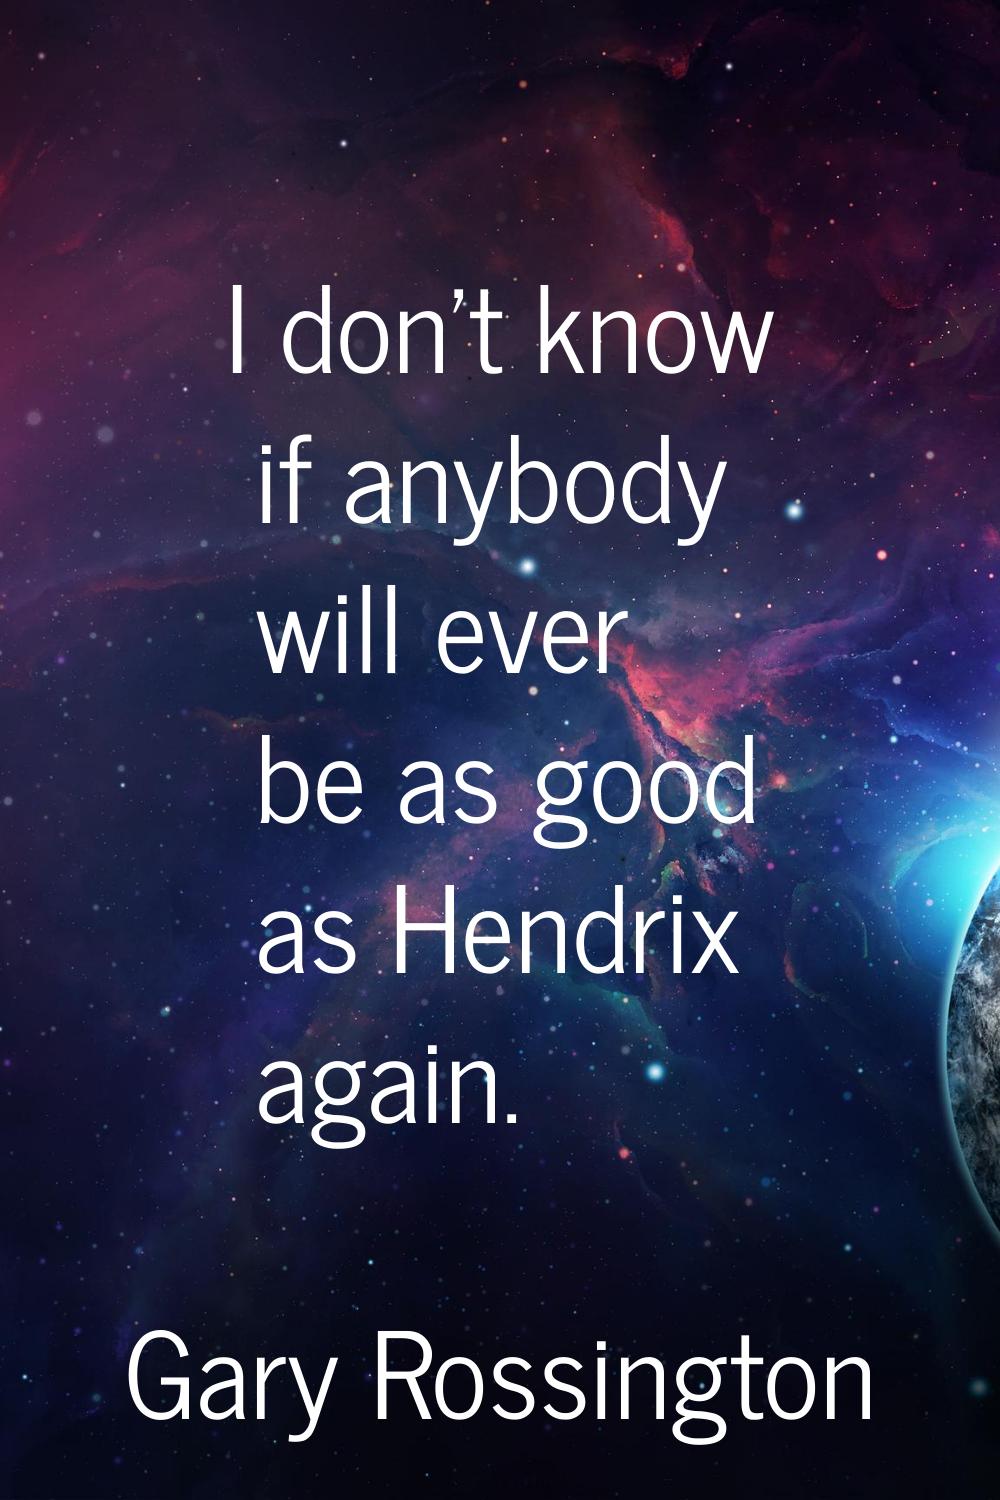 I don't know if anybody will ever be as good as Hendrix again.